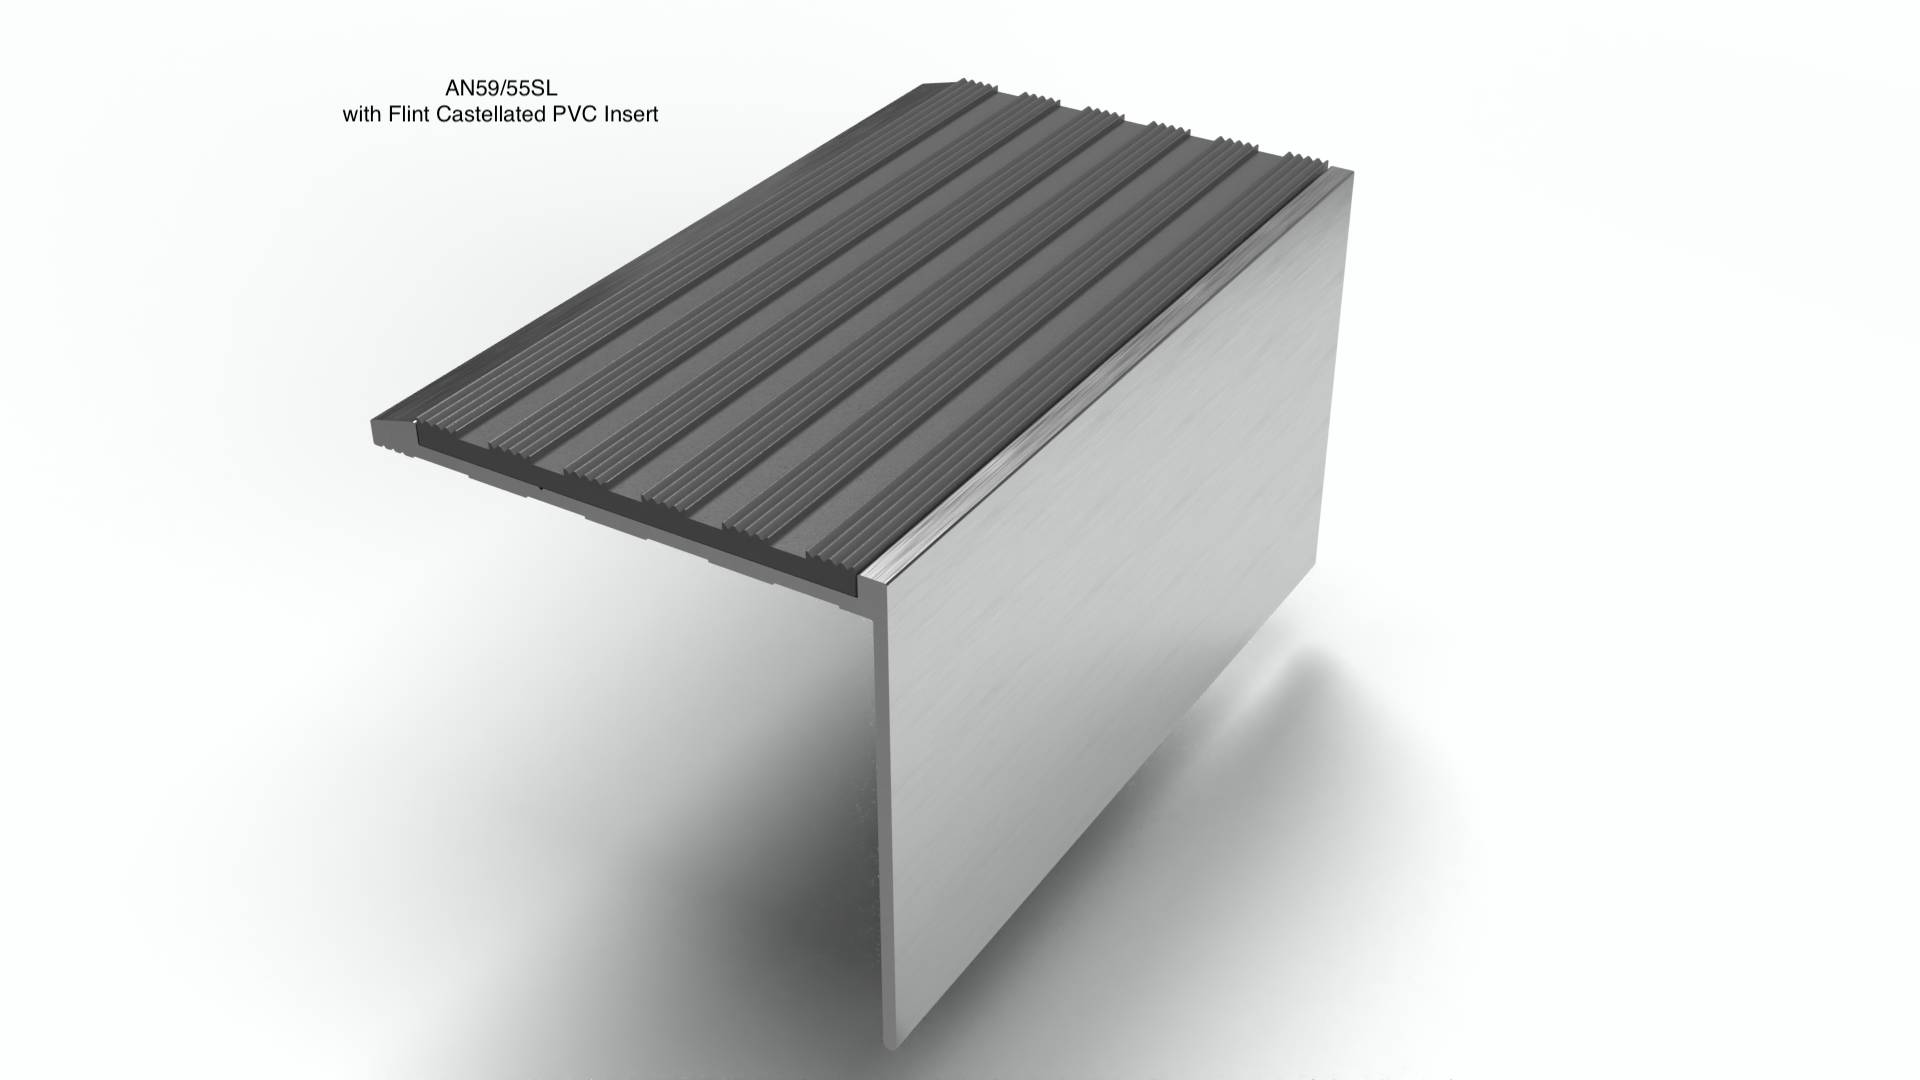 Aluminium Stair Nosings with Insert for Vinyl and Hardfloor Surfaces